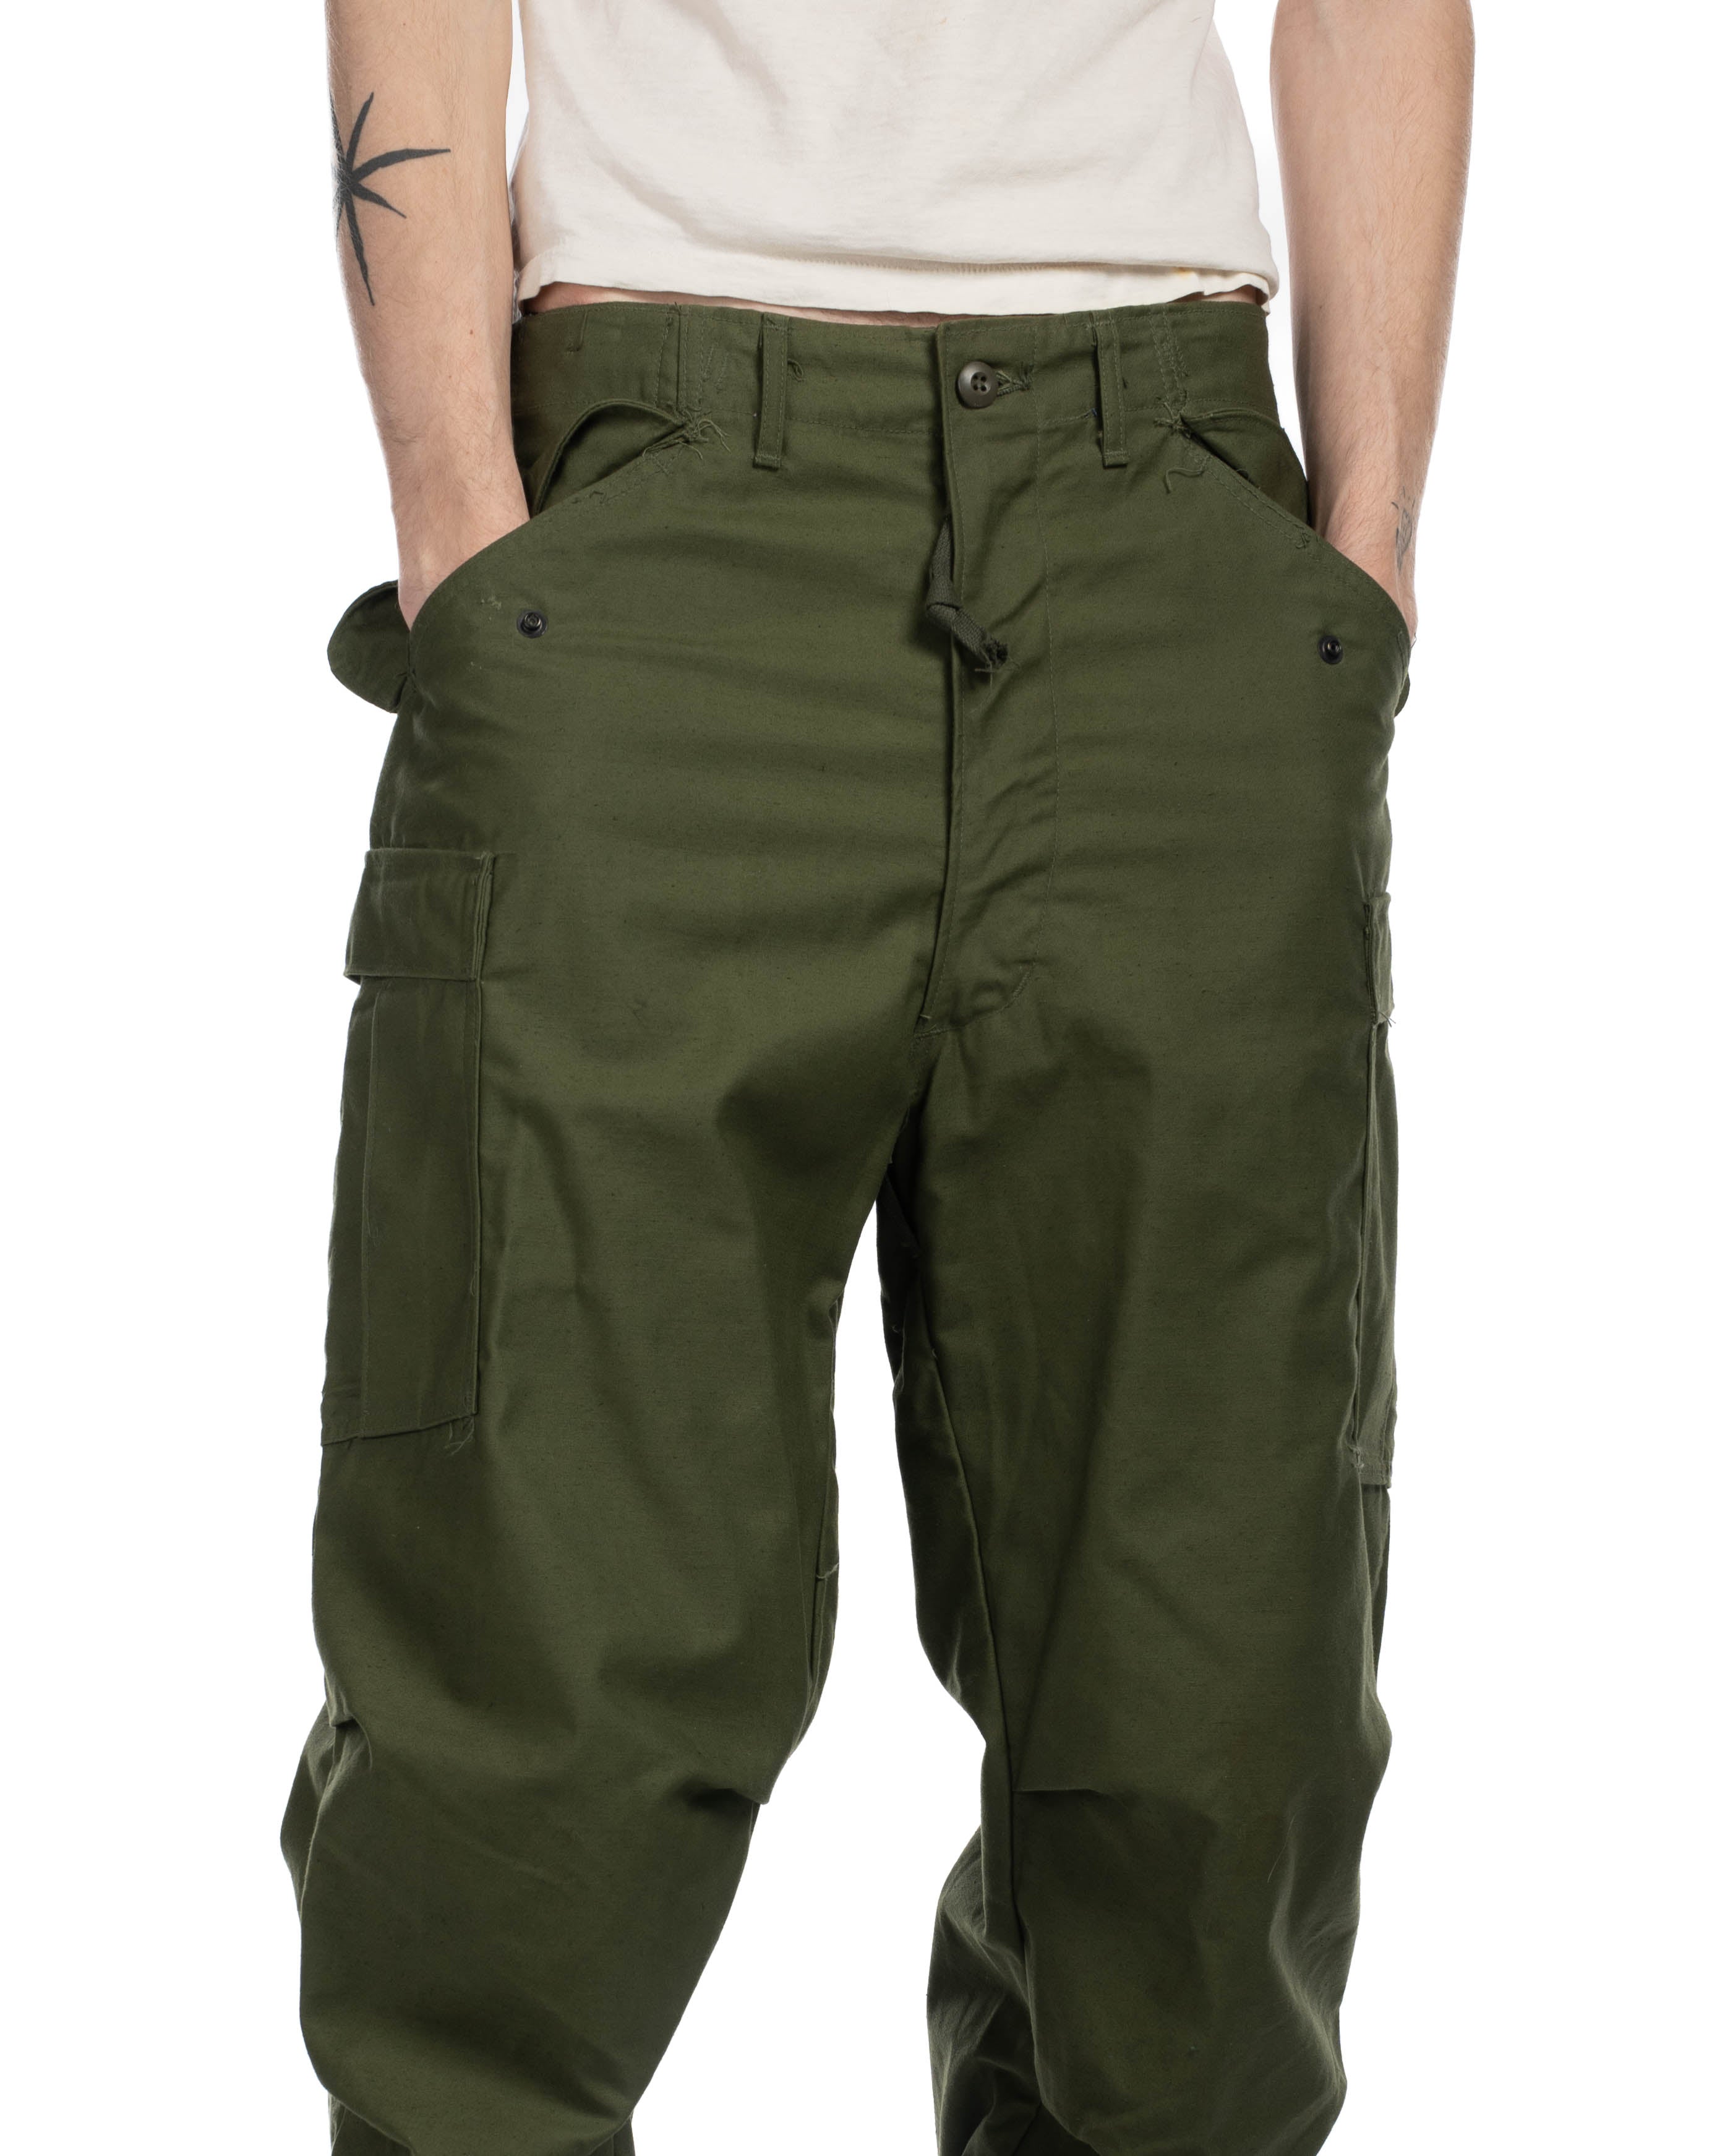 ECWCS Army Issue Extreme Cold Weather Trousers Gen III Men's Med Reg Pants  Gray - La Paz County Sheriff's Office 